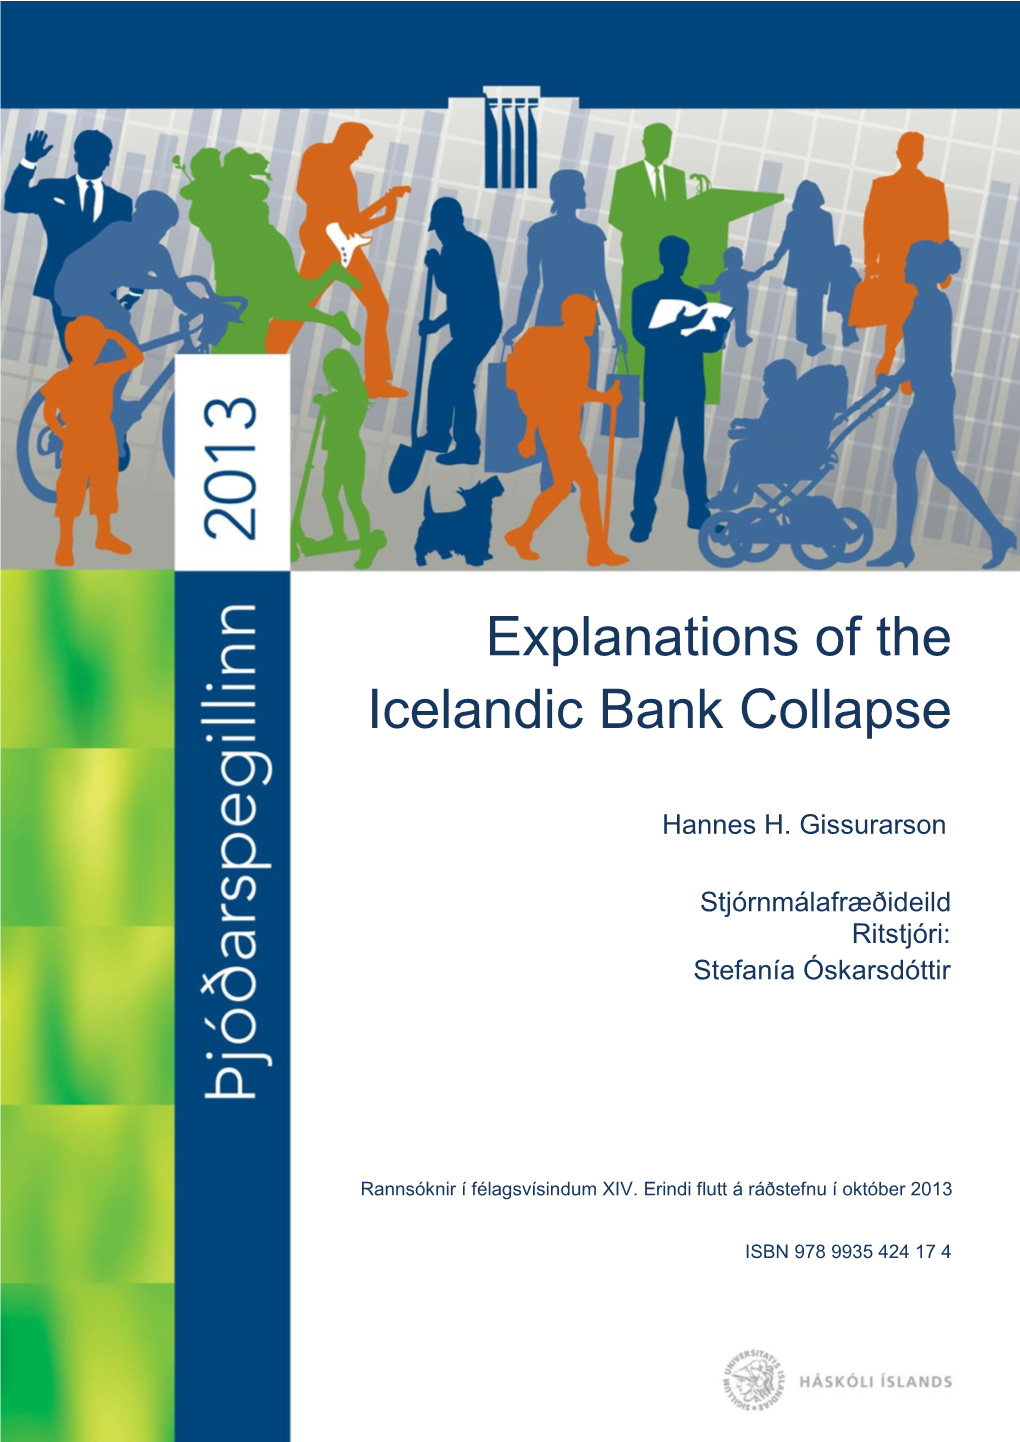 Explanations of the Icelandic Bank Collapse